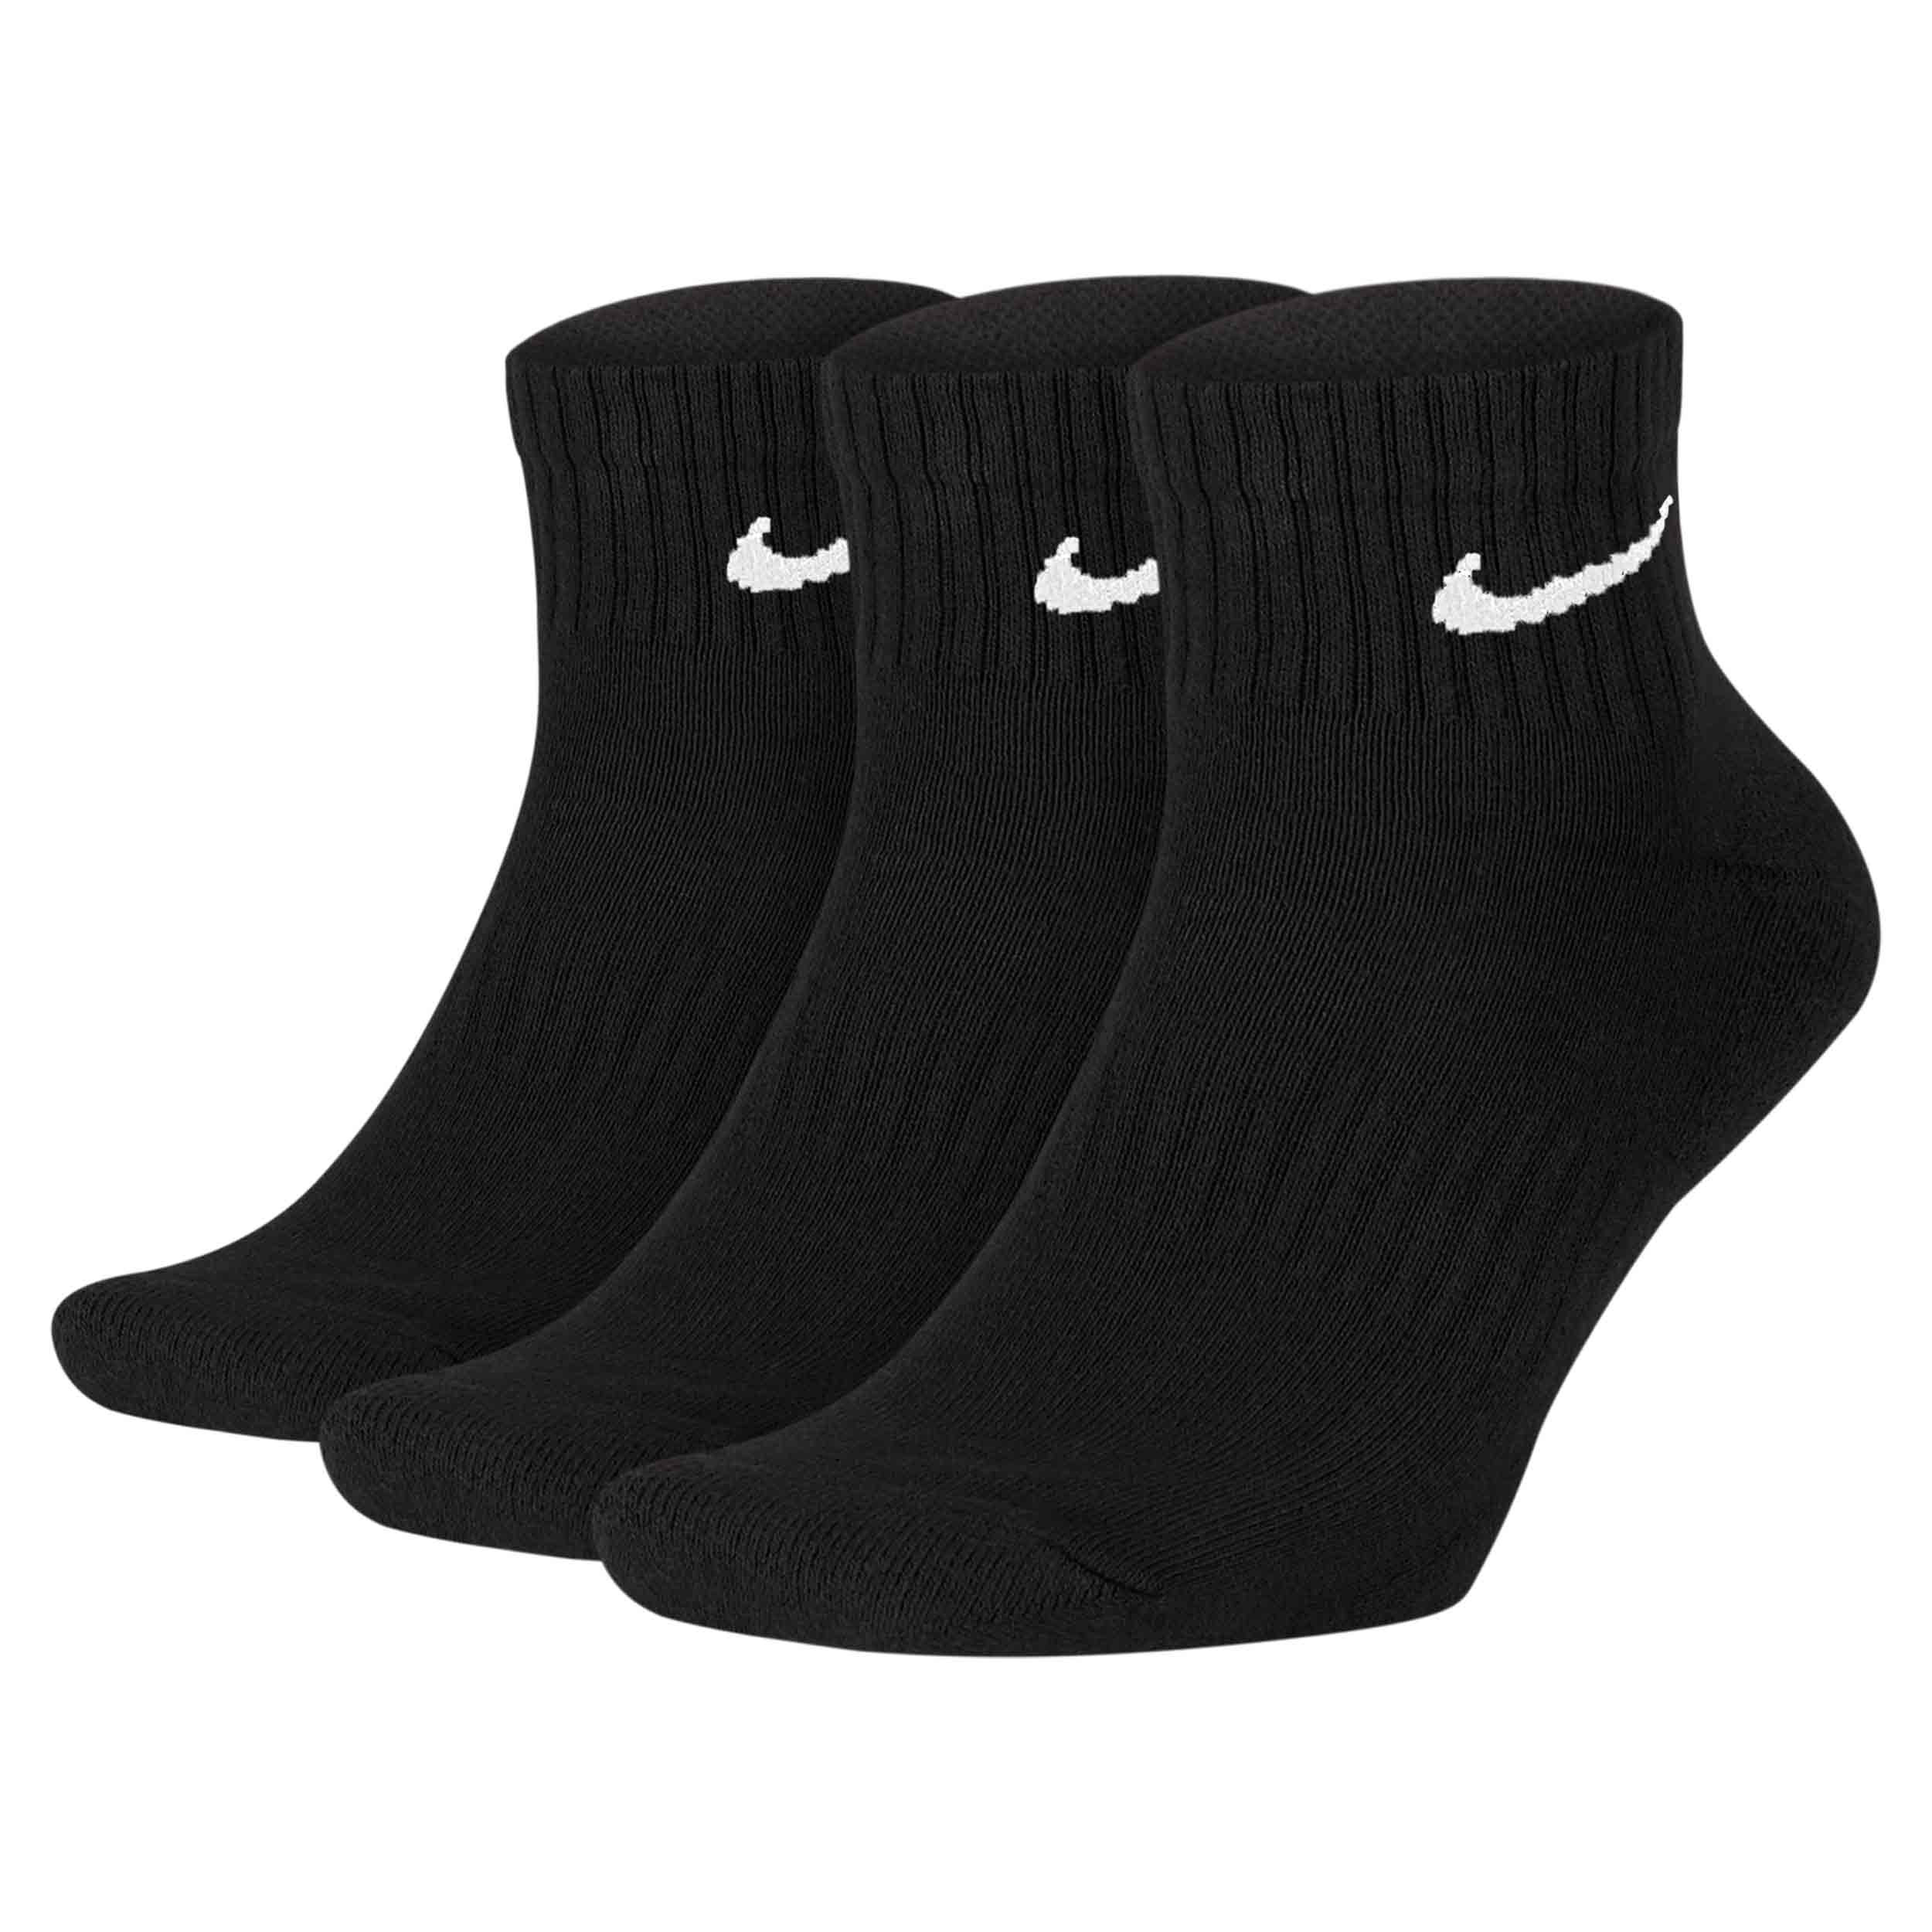 Pack 3 calcetines mujer sport - TRICOT